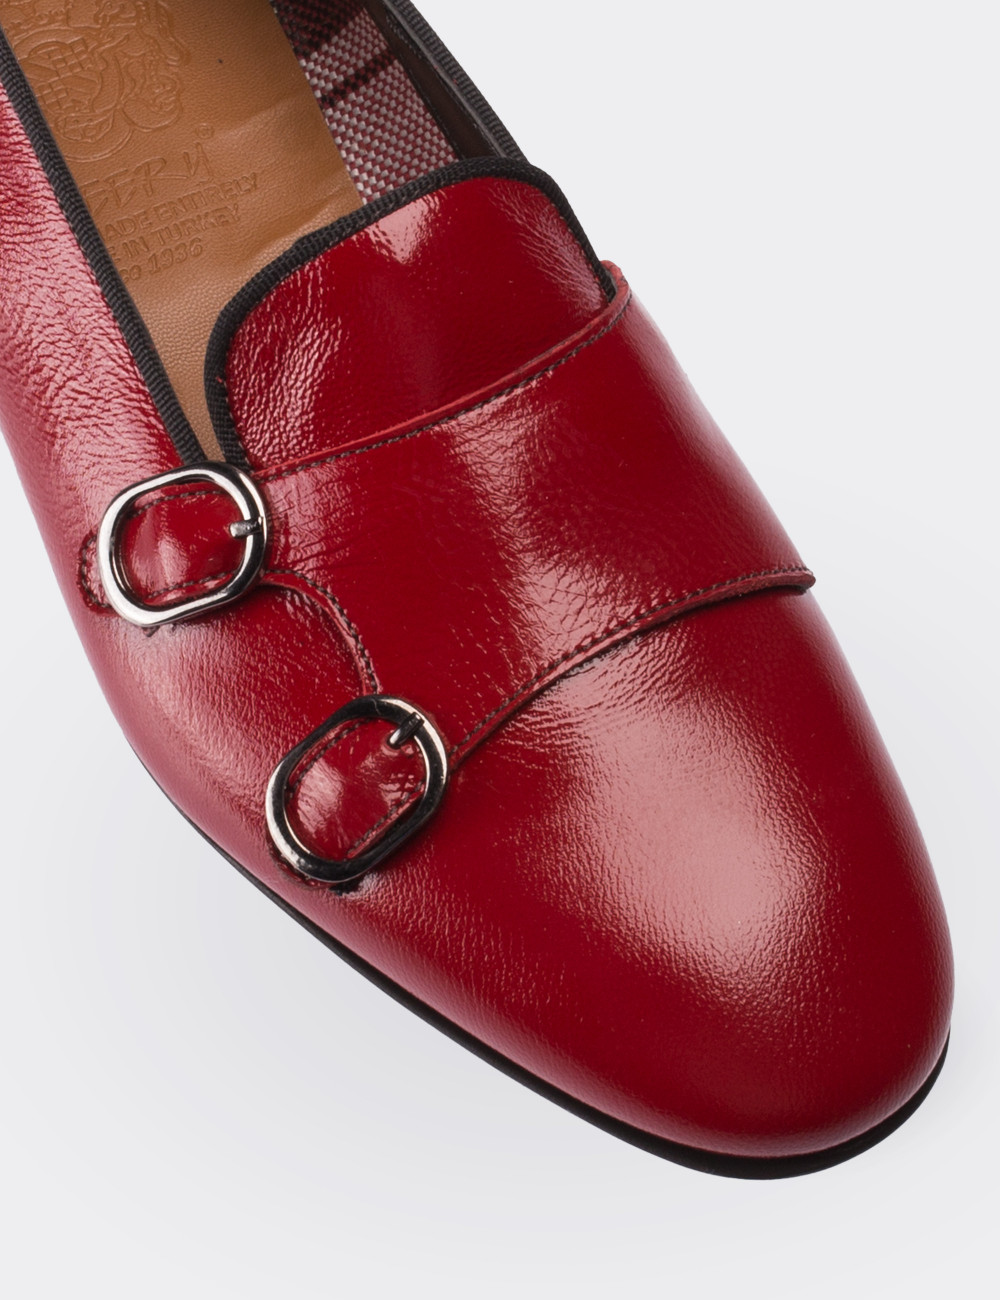 Red Patent Leather Loafers - 01611ZKRMM01